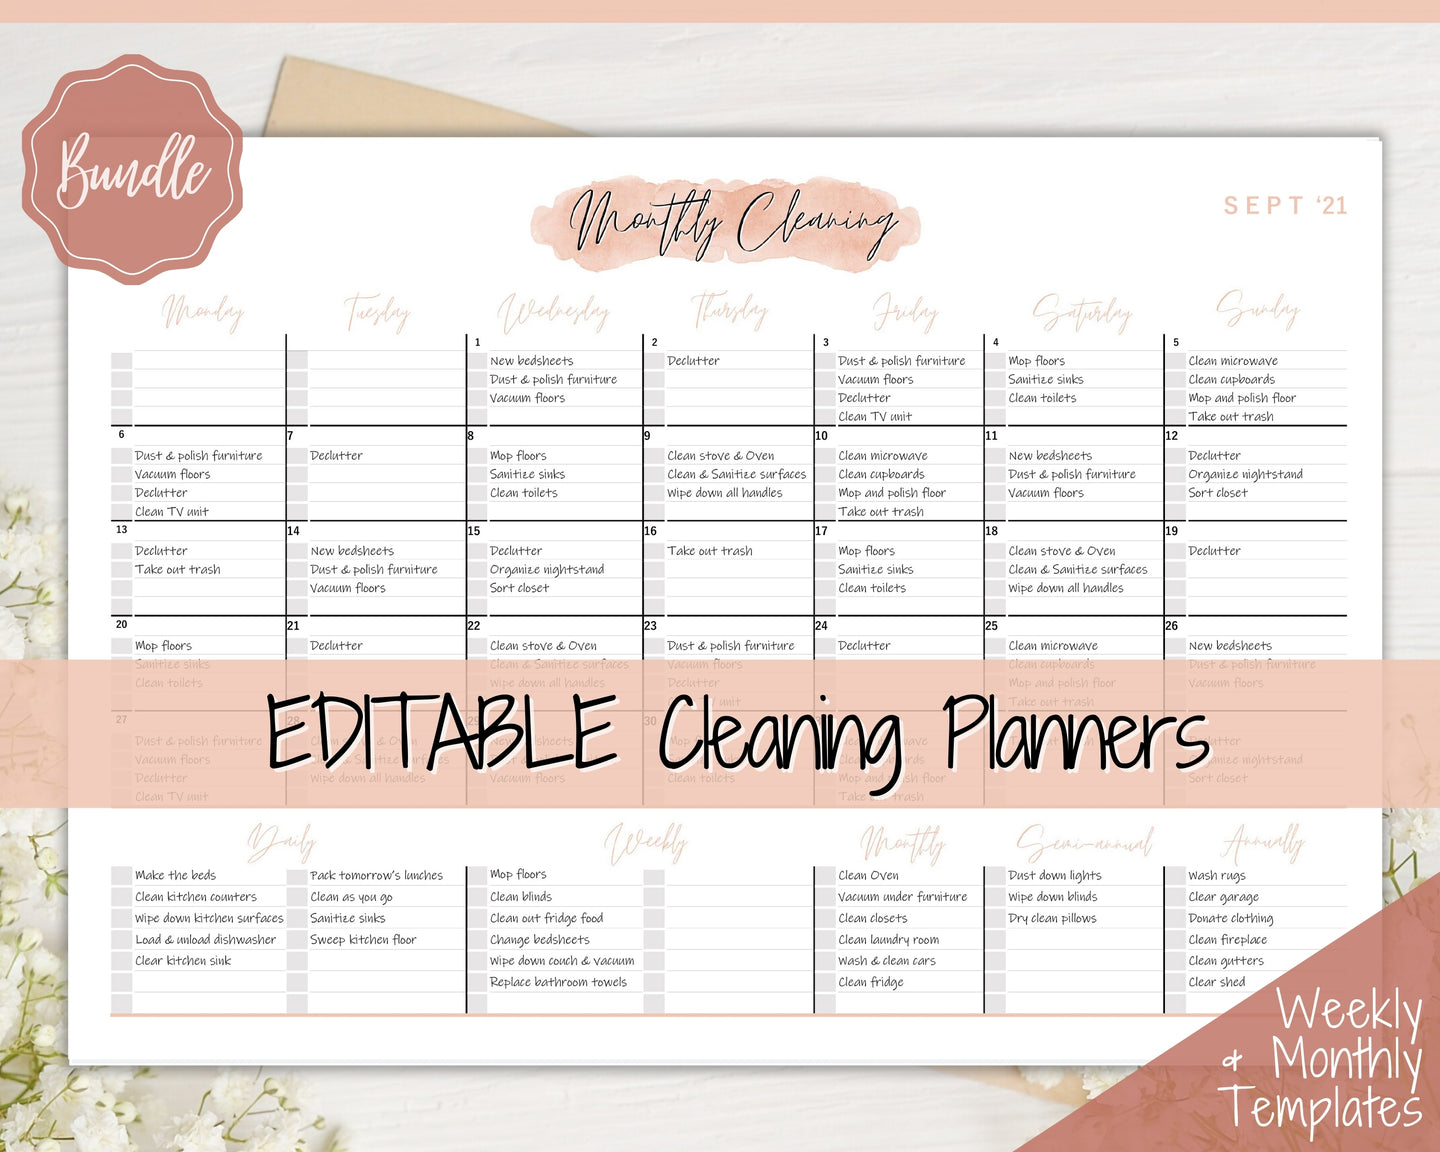 EDITABLE Cleaning Planner, Cleaning Checklist & Cleaning Schedule | Weekly House Chores, Clean Home Routine, Monthly Cleaning List | Nude